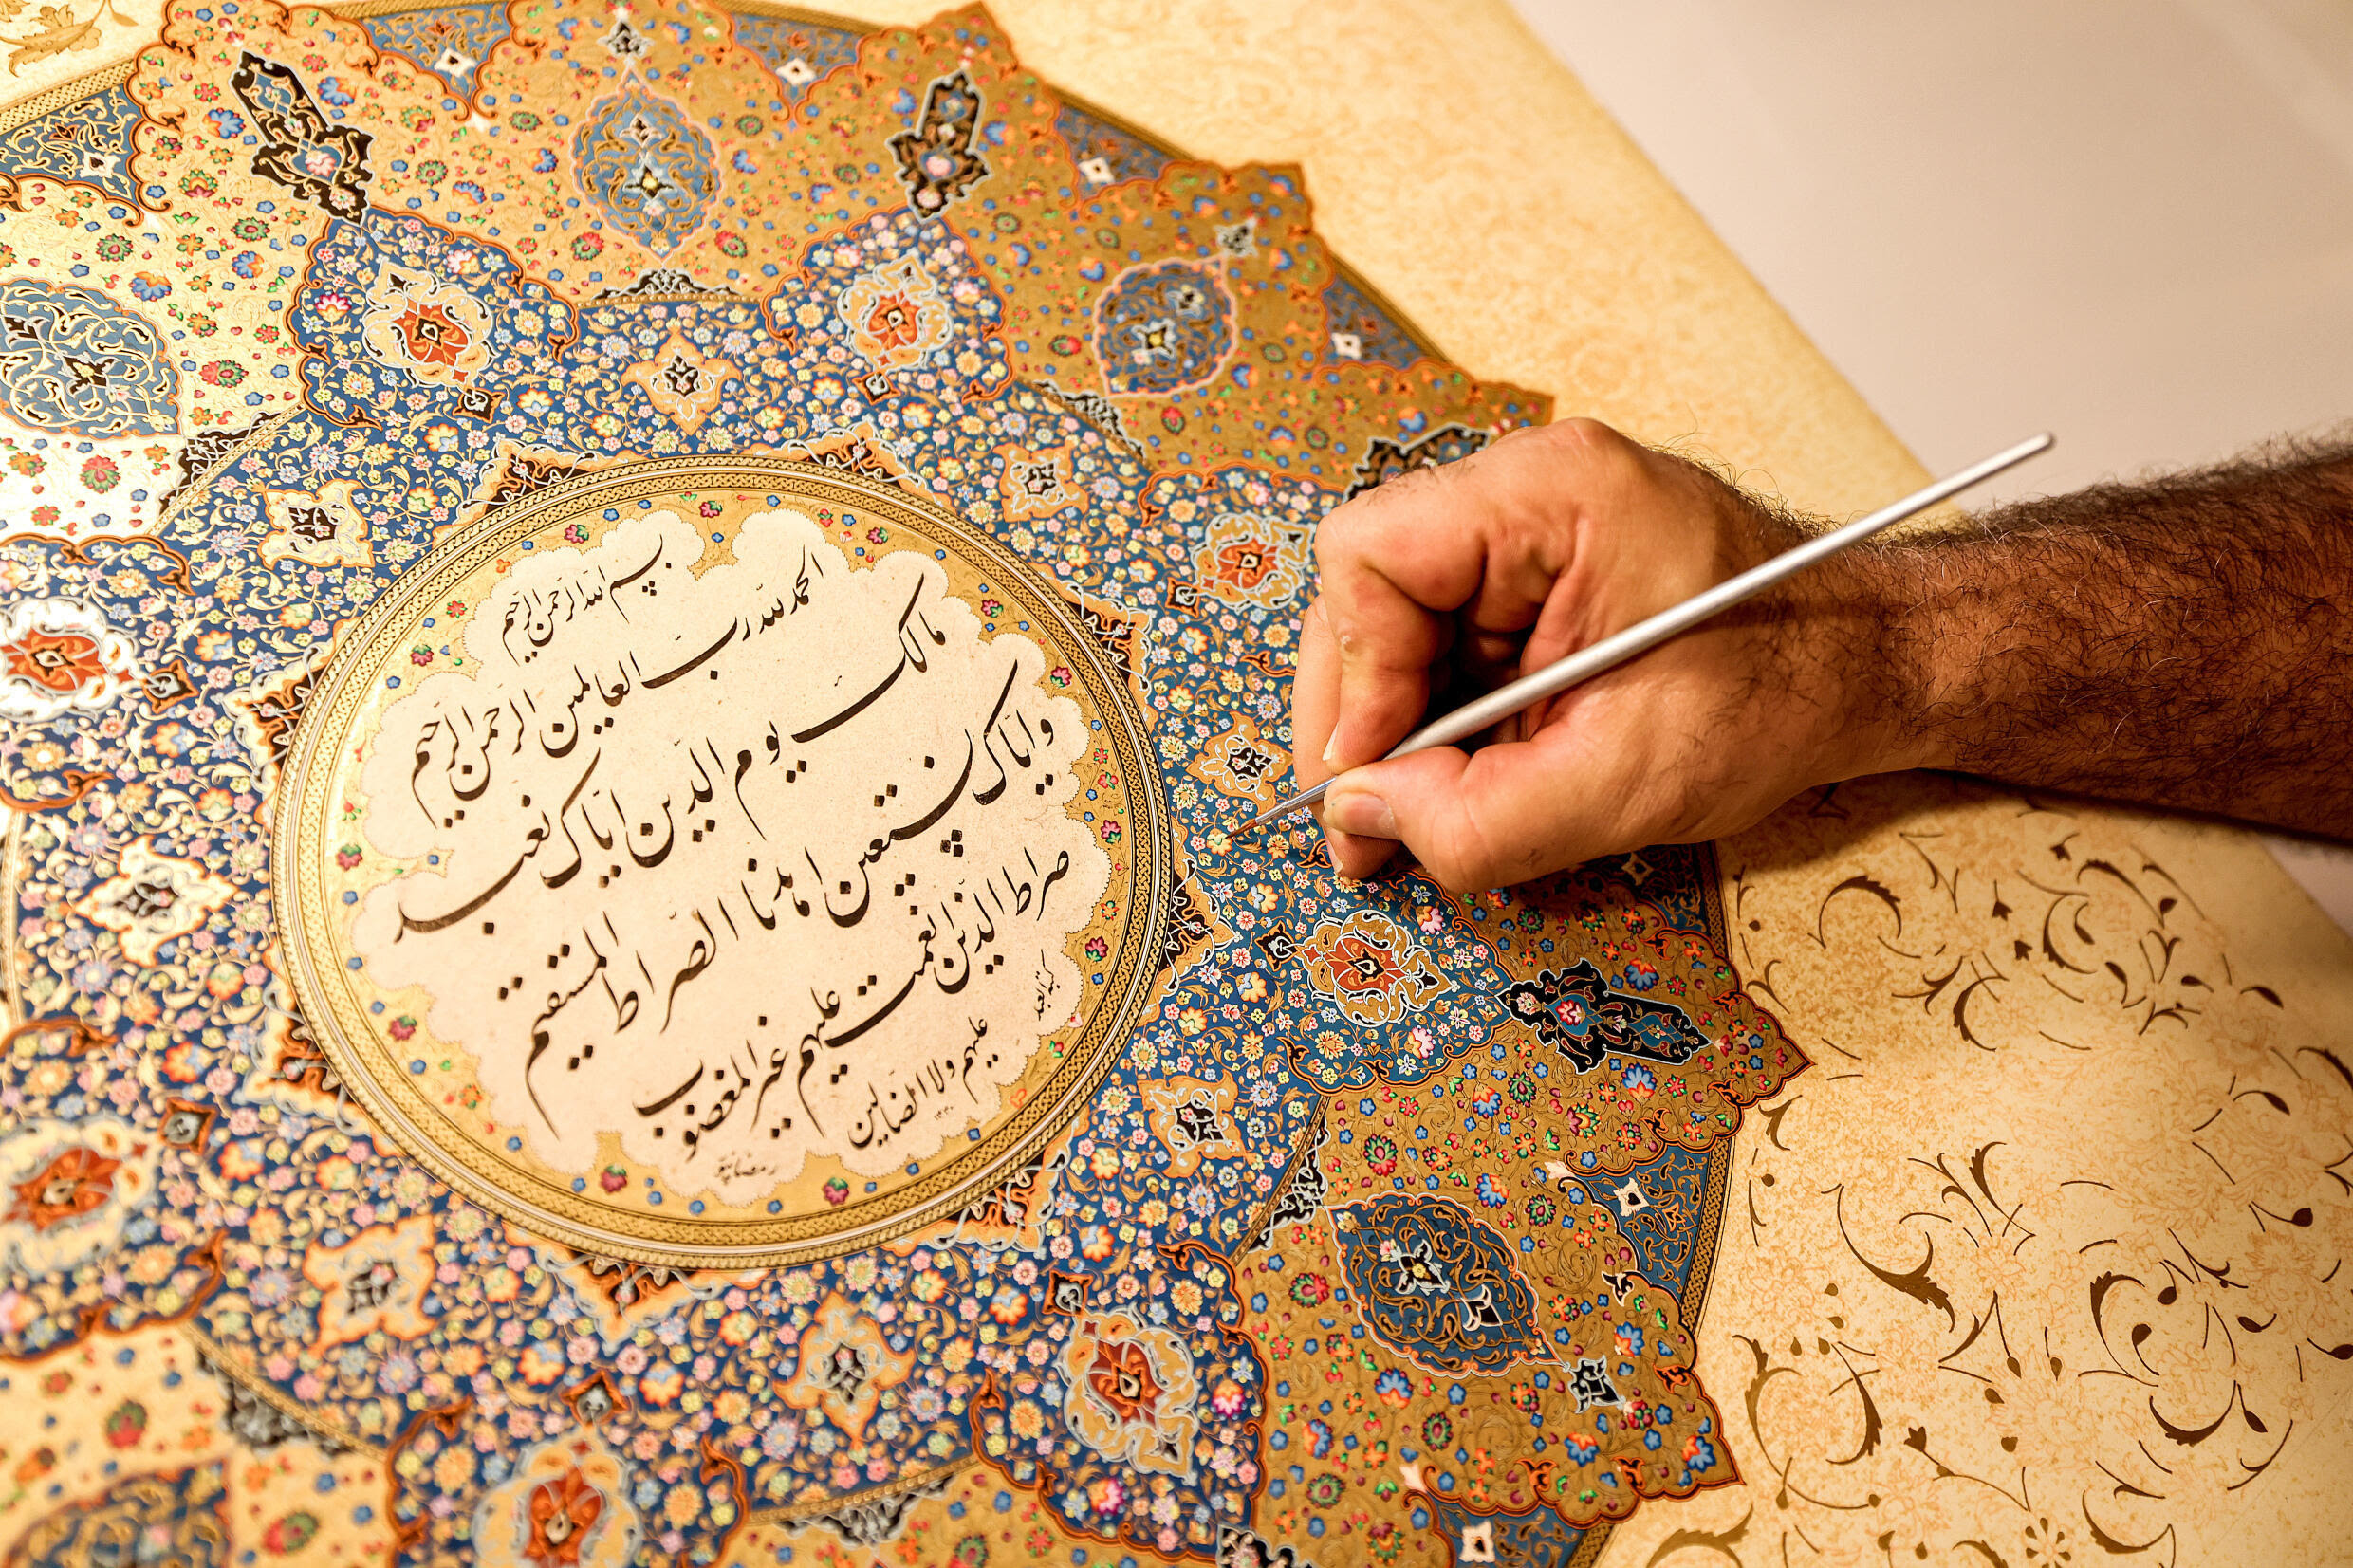 Tazhib's non-figurative and geometric flourishes have traditionally adorned the margins of holy books and epic poems